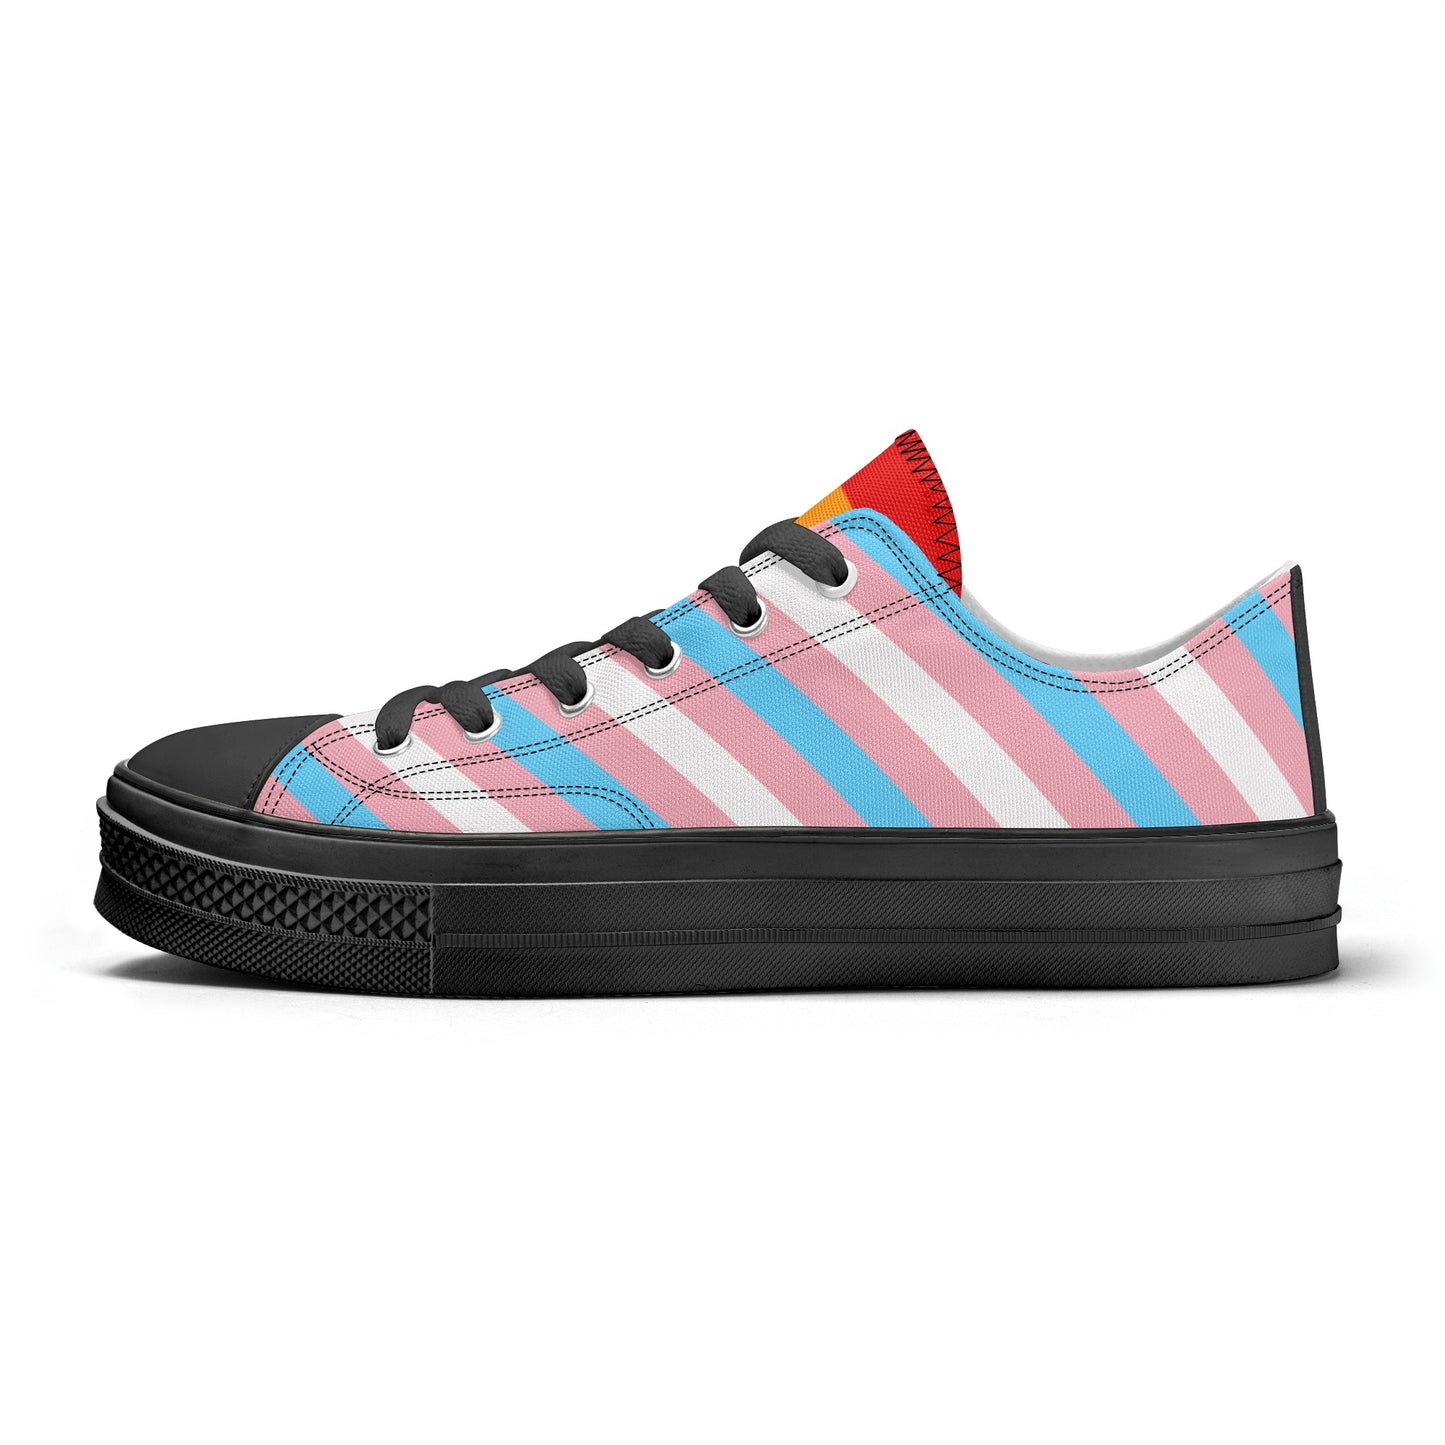 Transgender Pride Collection - Mens Classic Low Top Canvas Shoes for the LGBTQIA+ community